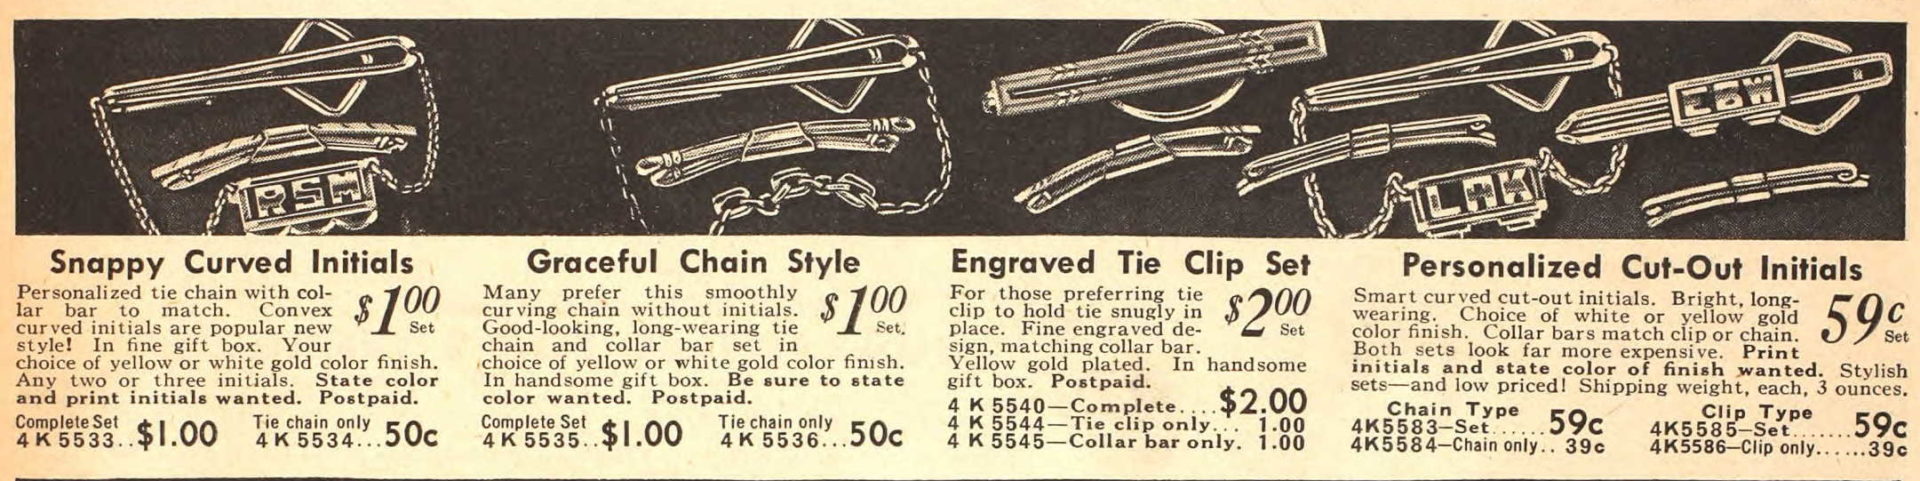 1938 men's tie chains and tie clips